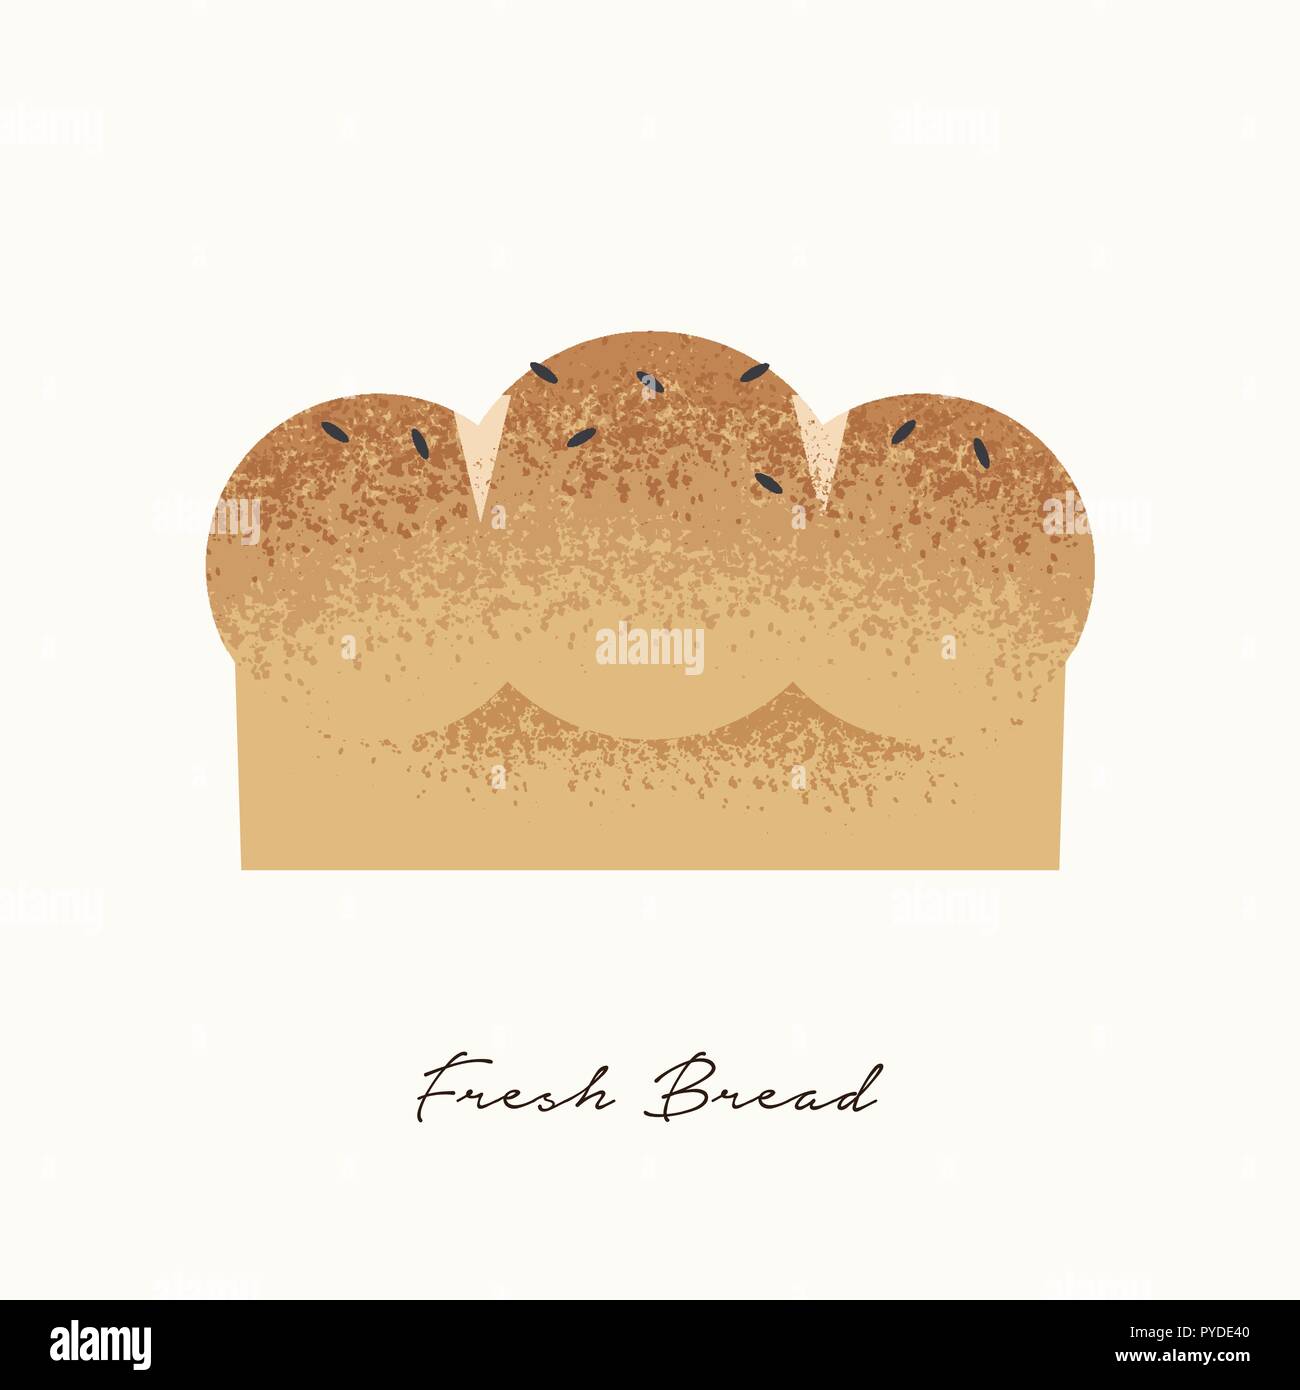 Fresh Bread illustration in hand drawn texture style with seeds for bakery, healthy nutrition or homemade food concept on isolated background. Stock Vector